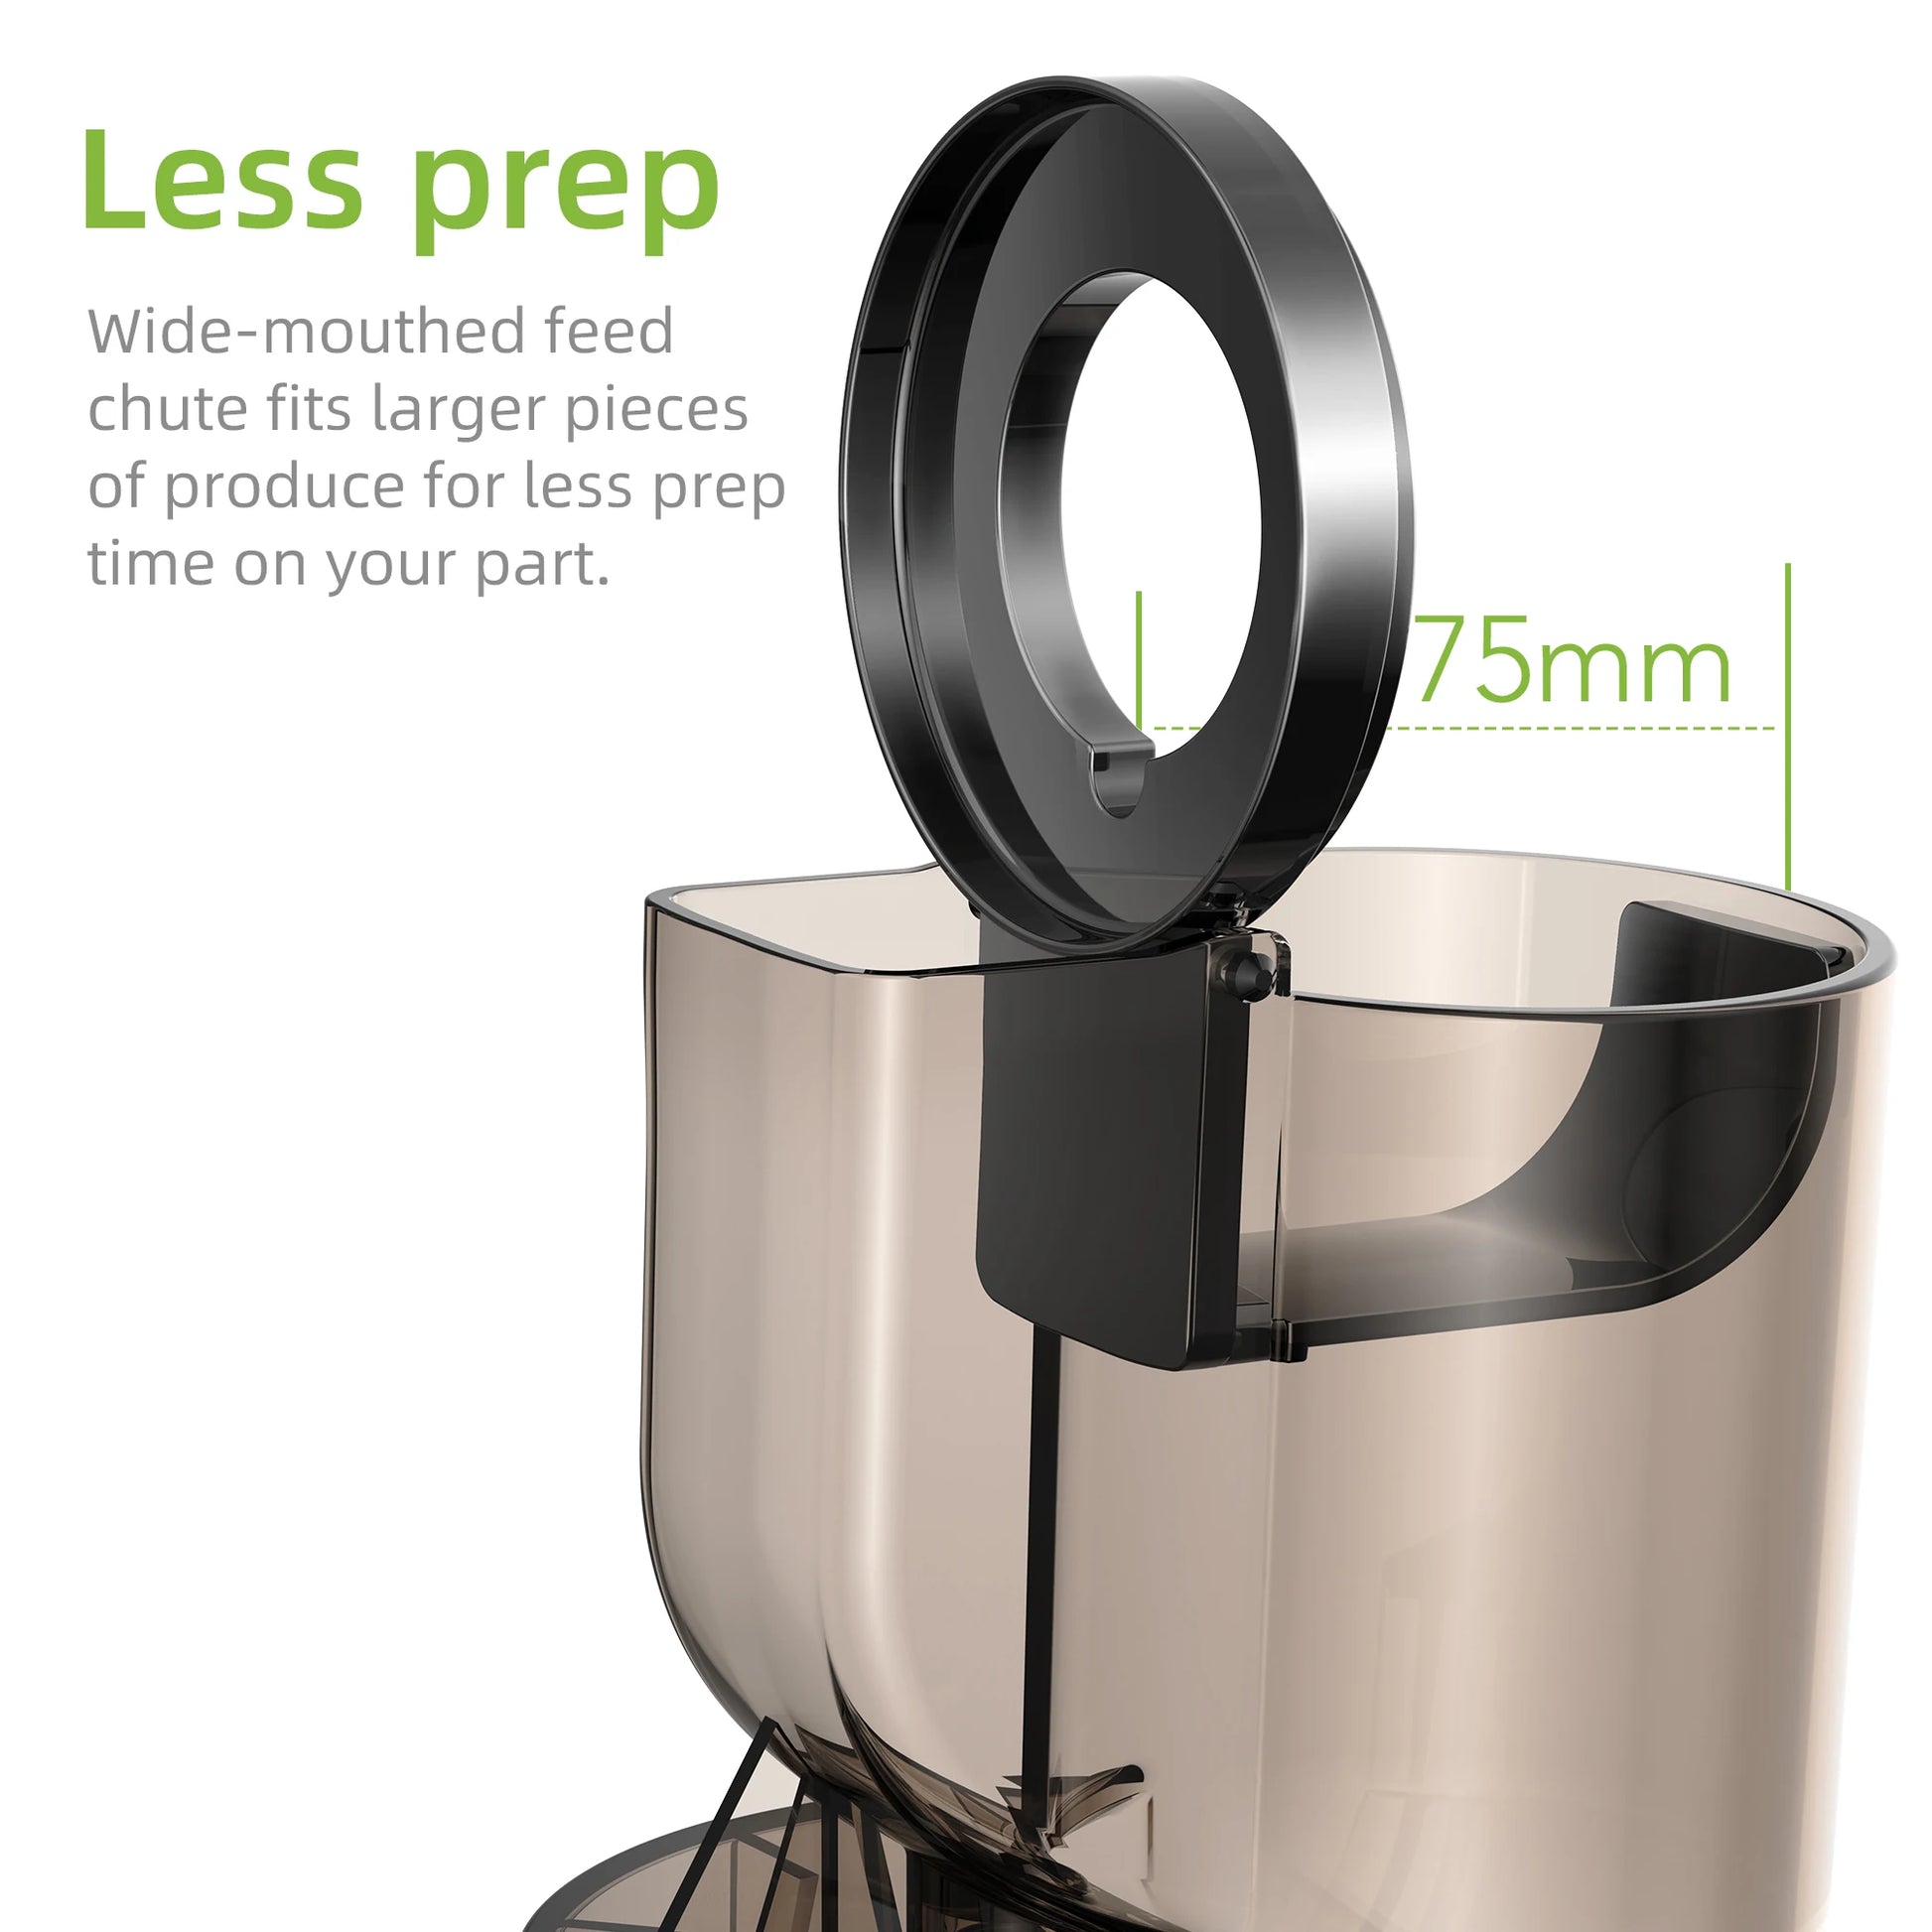 BioloMix Cold Press Juicer with 75mm Feed Chute, 200W 40-65RPM PowerfuBioloMix Cold Press Juicer